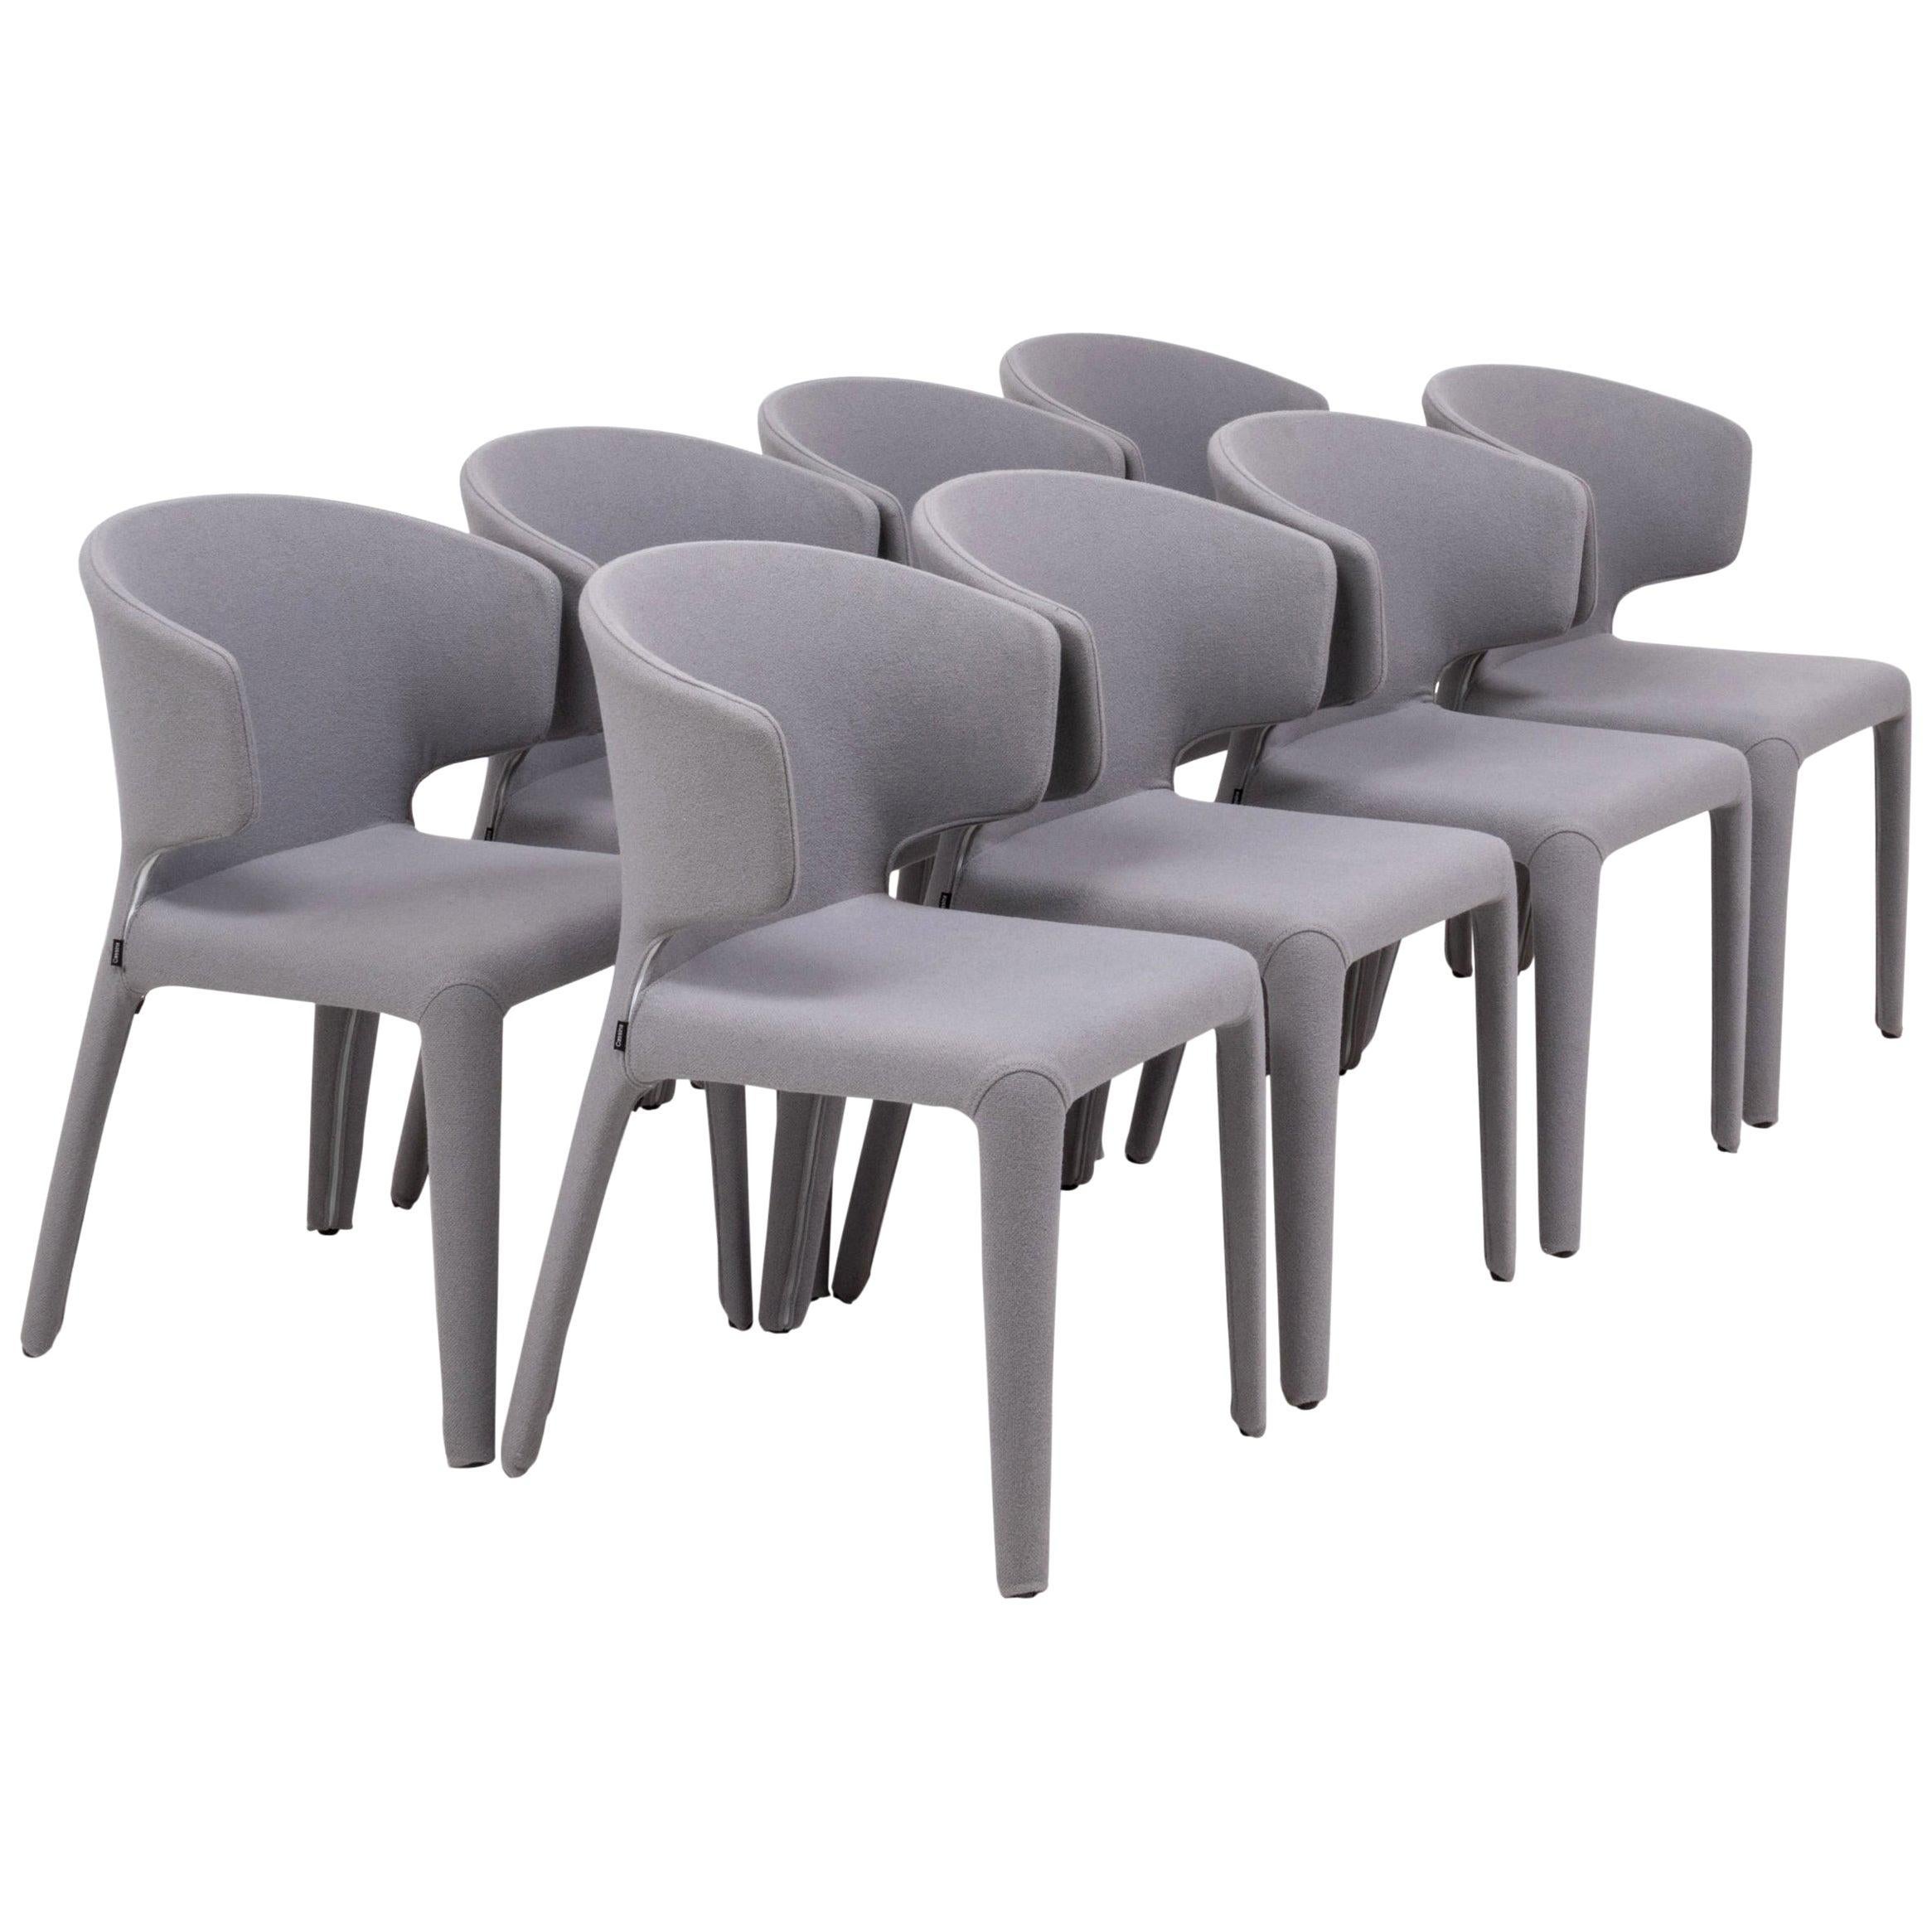 Cassina by Hannes Wettstein 367 Hola Grey Fabric Dining Chairs, Set of 8